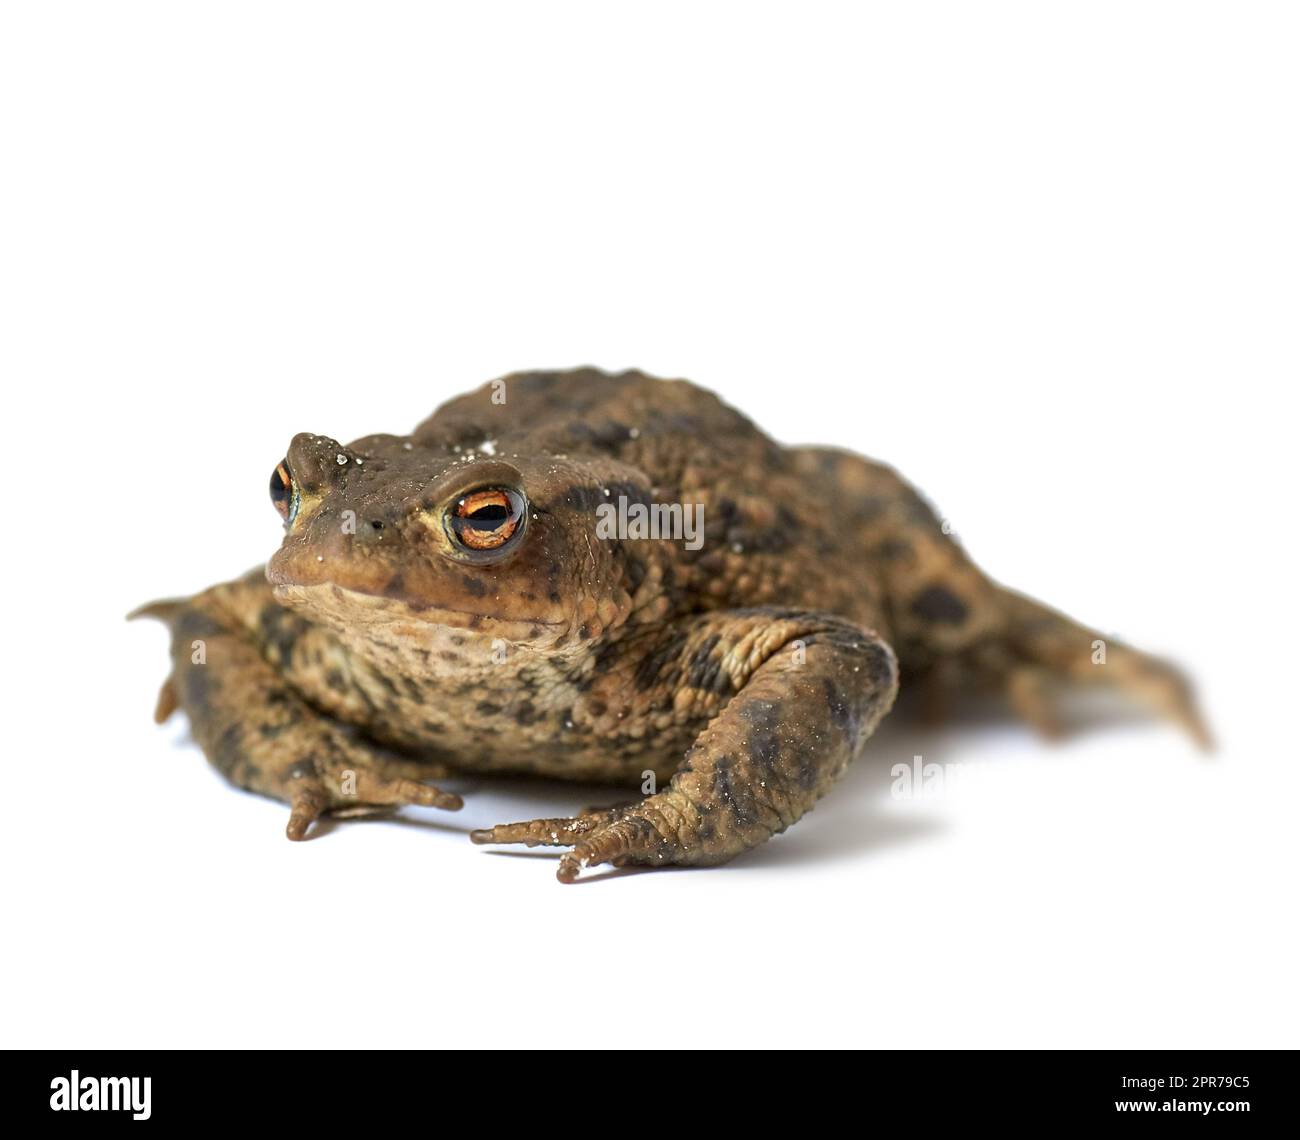 Portrait of a common European toad isolated on white studio background. One brown frog with bumpy black spots. A wet amphibian species with rough textured leathery skin and short legs Stock Photo